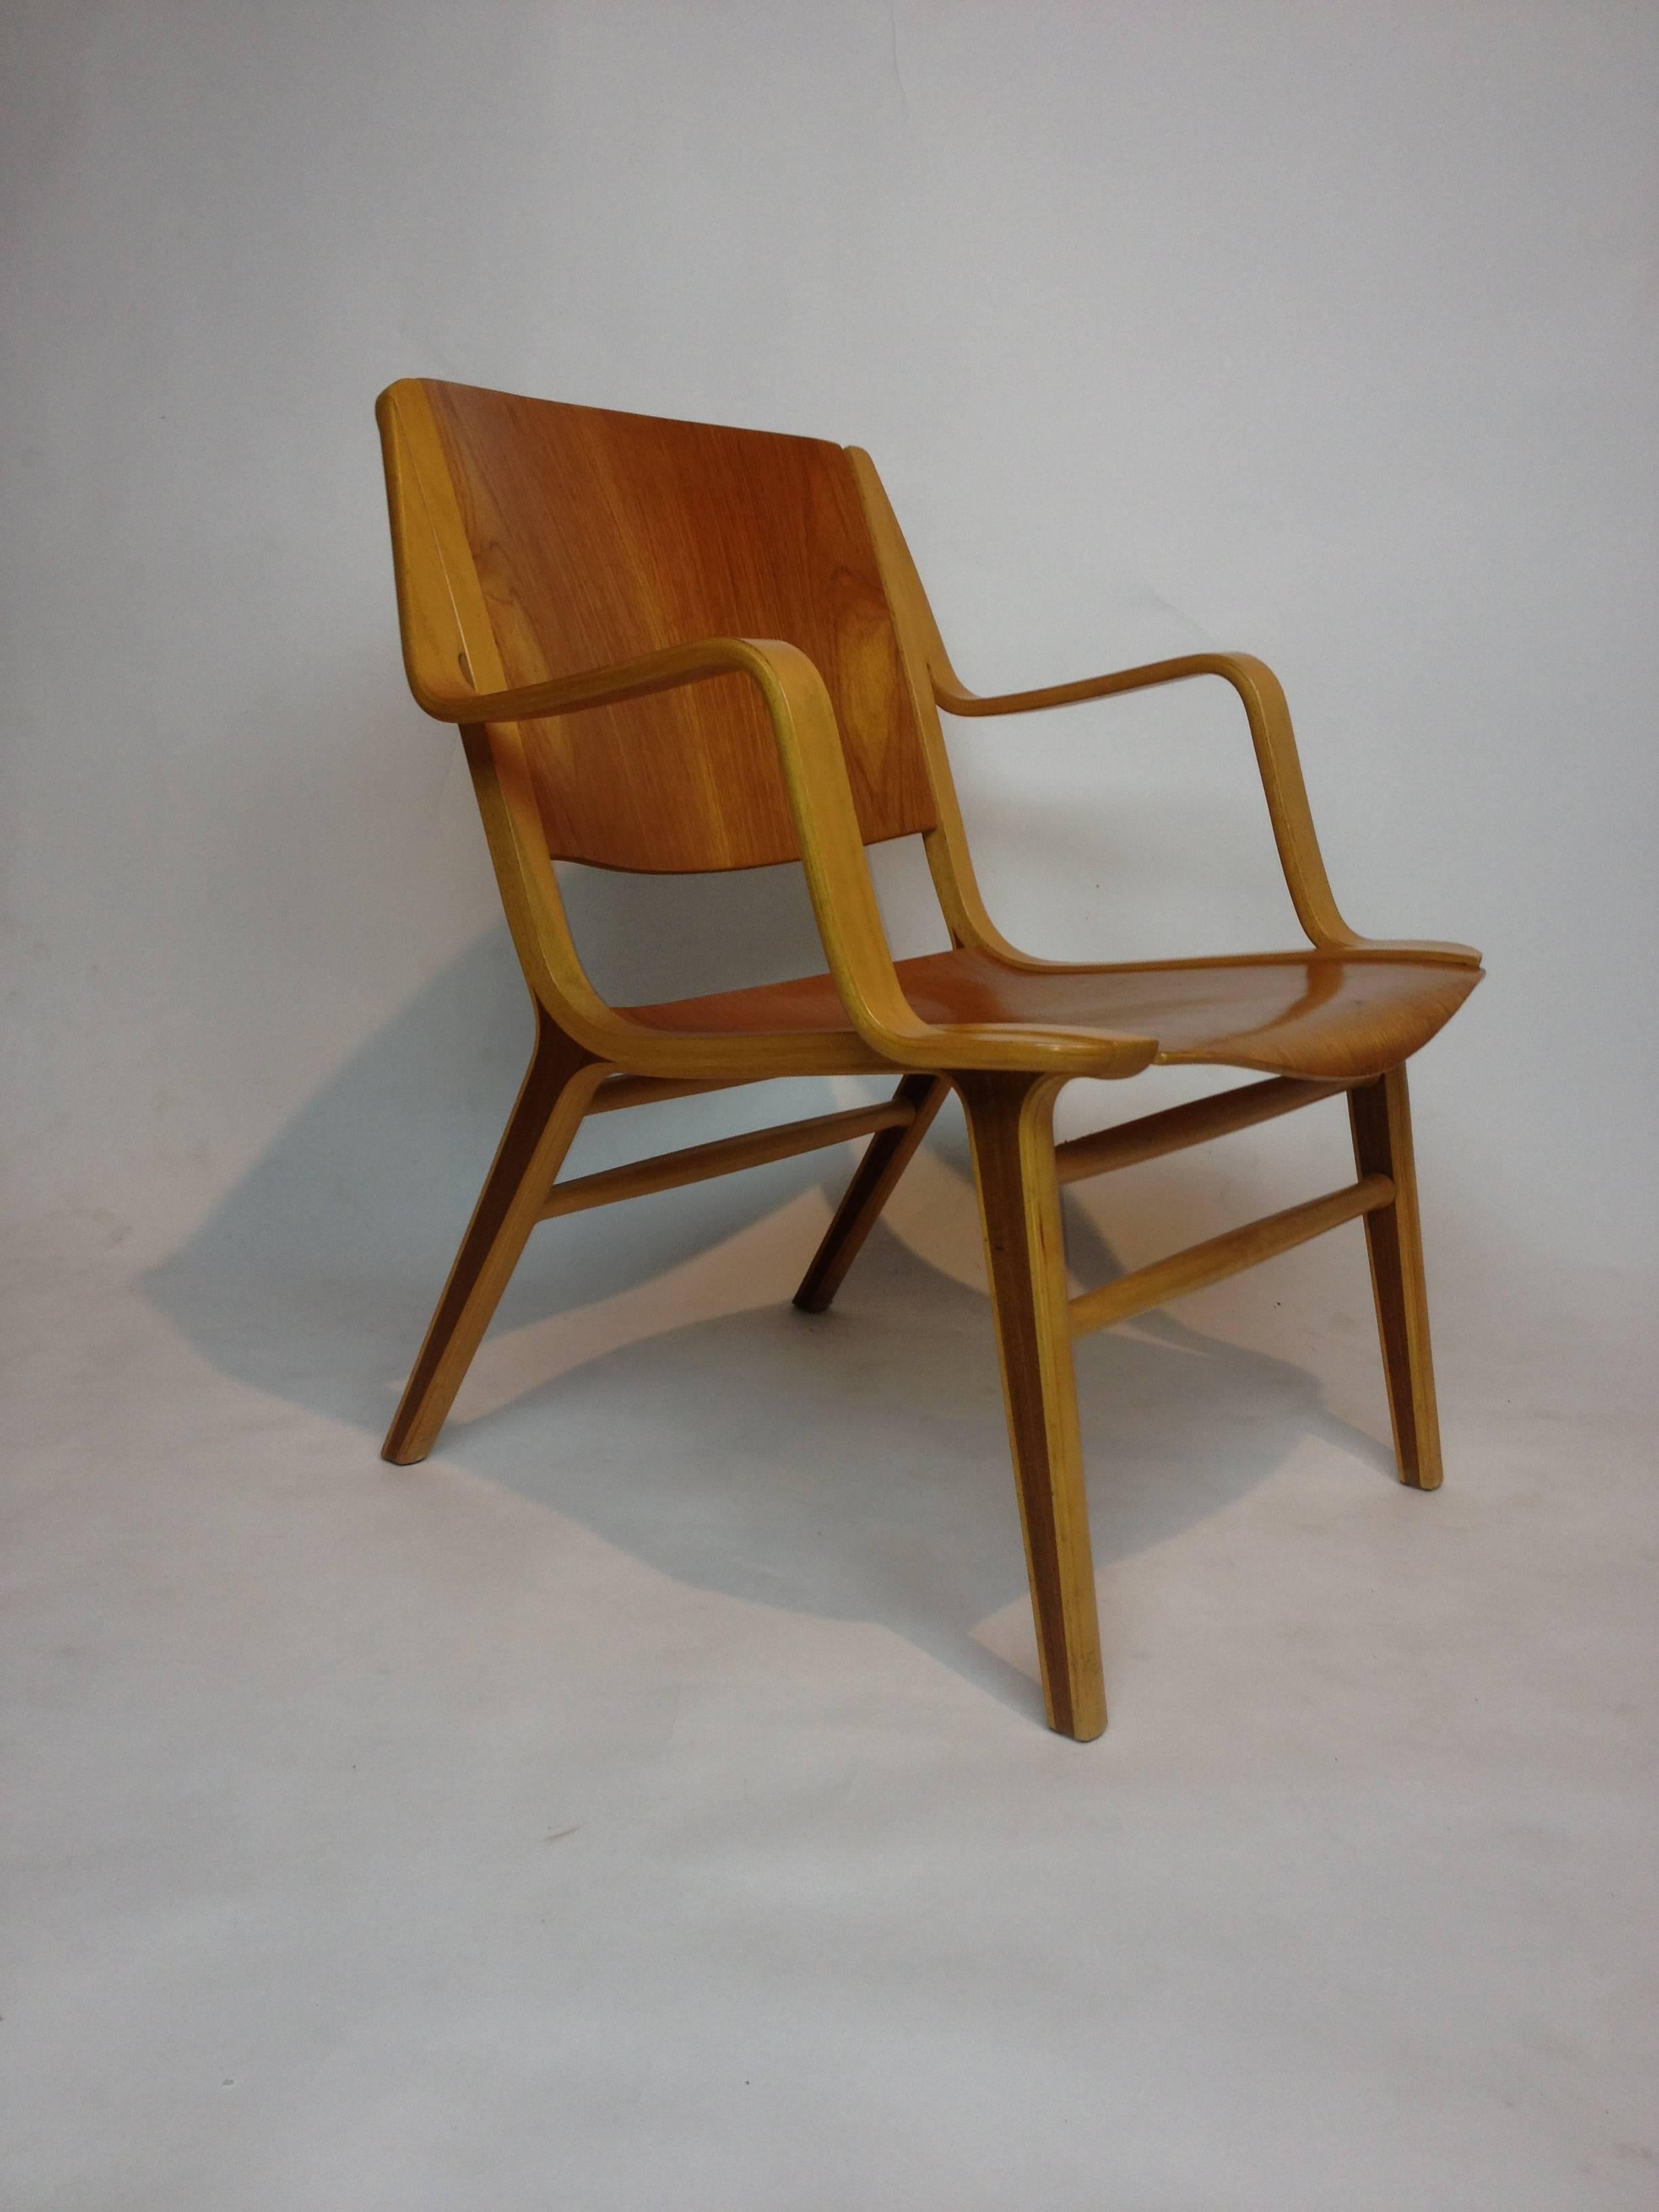 1950s Ax Chair Designed by Peter Hvidt & Orla Molgaard-Nielsen for Fritz Hansen In Good Condition For Sale In Victoria, British Columbia